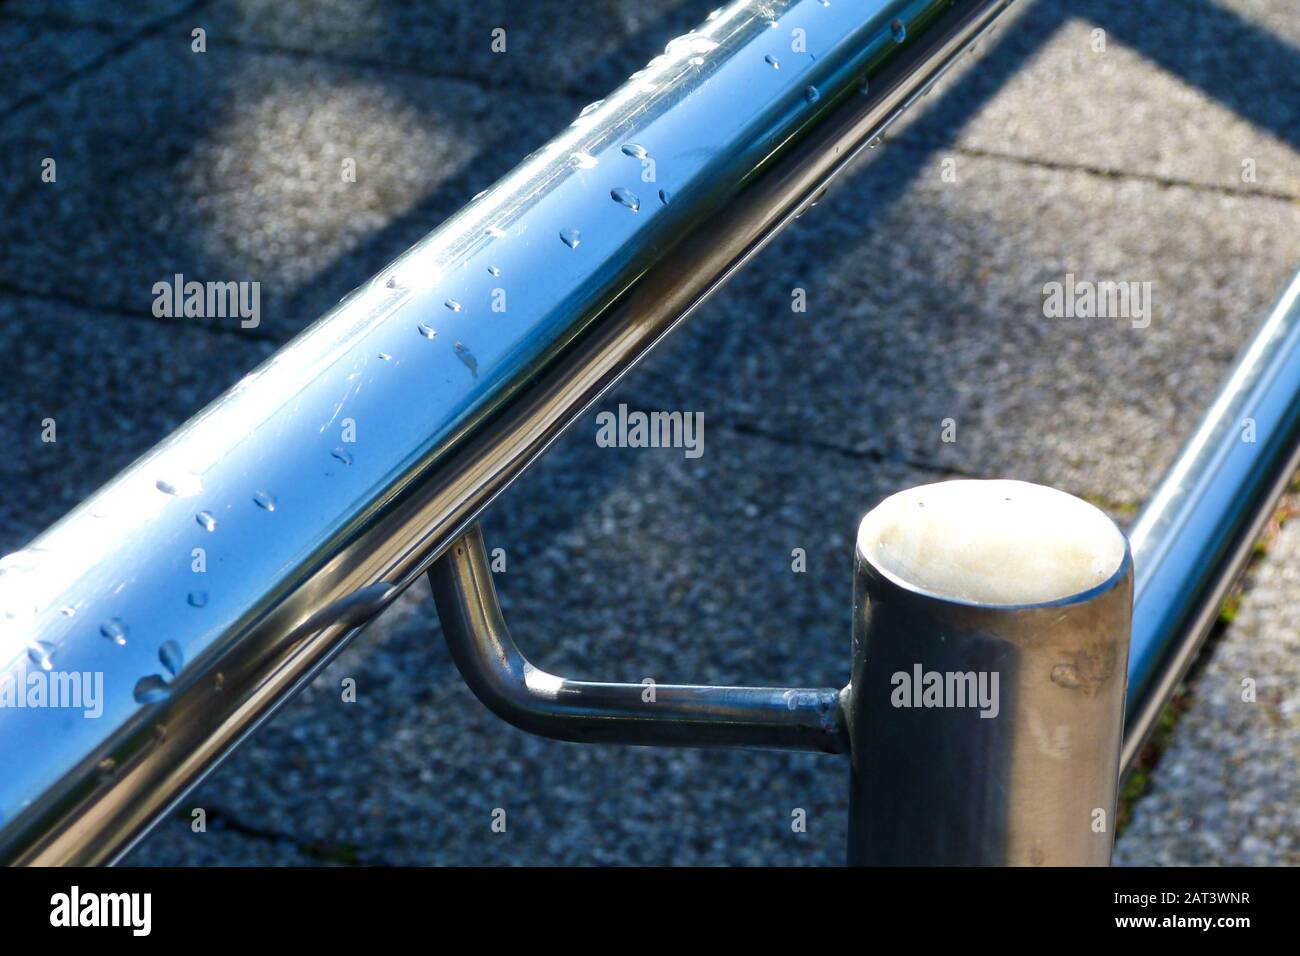 concrete tile paved wheelchair and handicap ramp. stainless steel handrail in selective focus. blurry gray background. barrier free access concept. Stock Photo